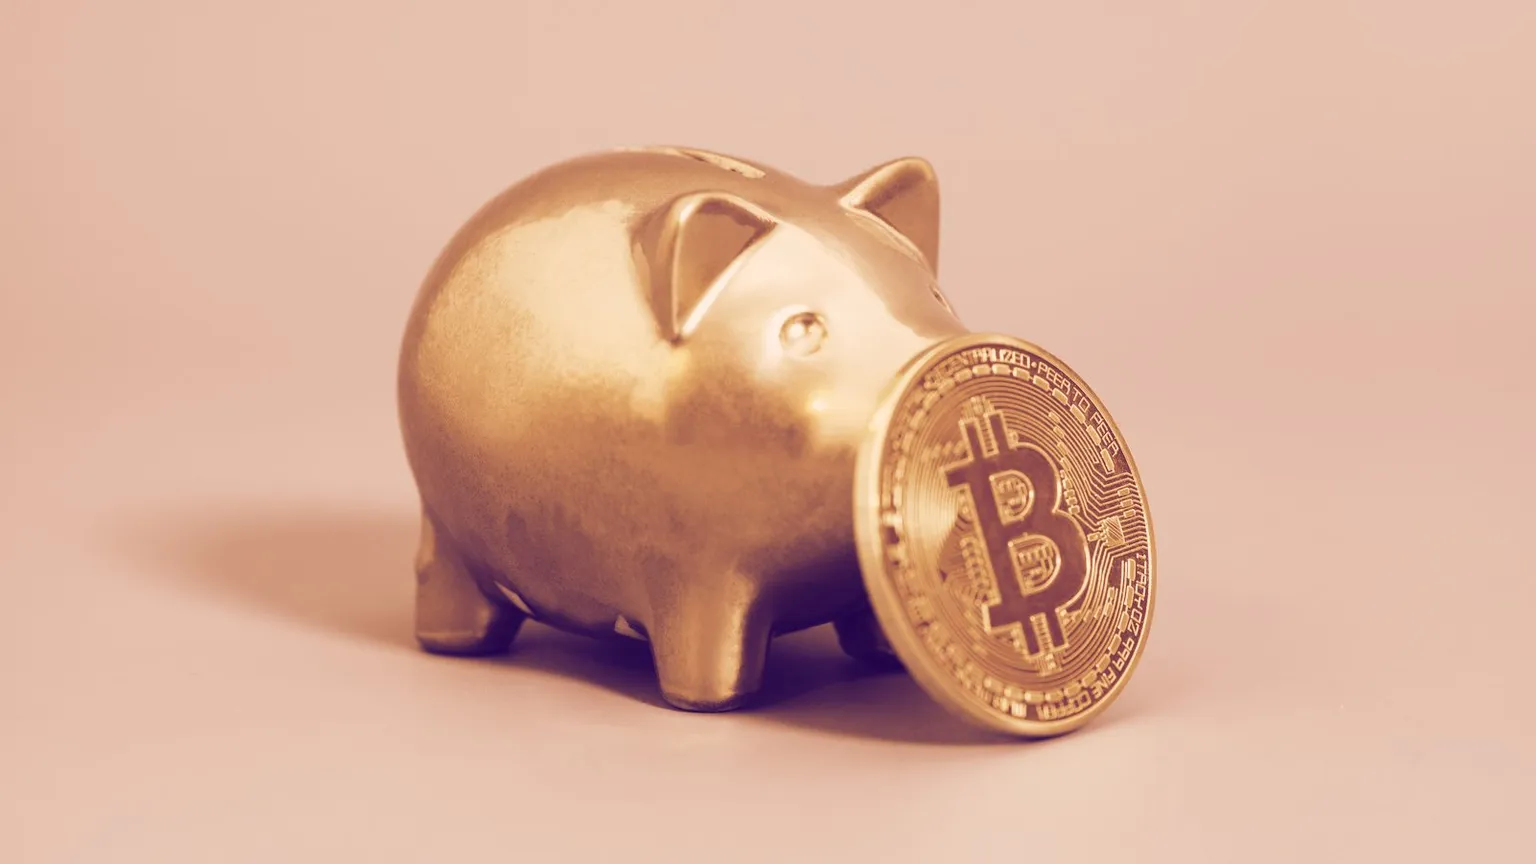 Bitcoin investments are becoming more popular. Image: Shutterstock